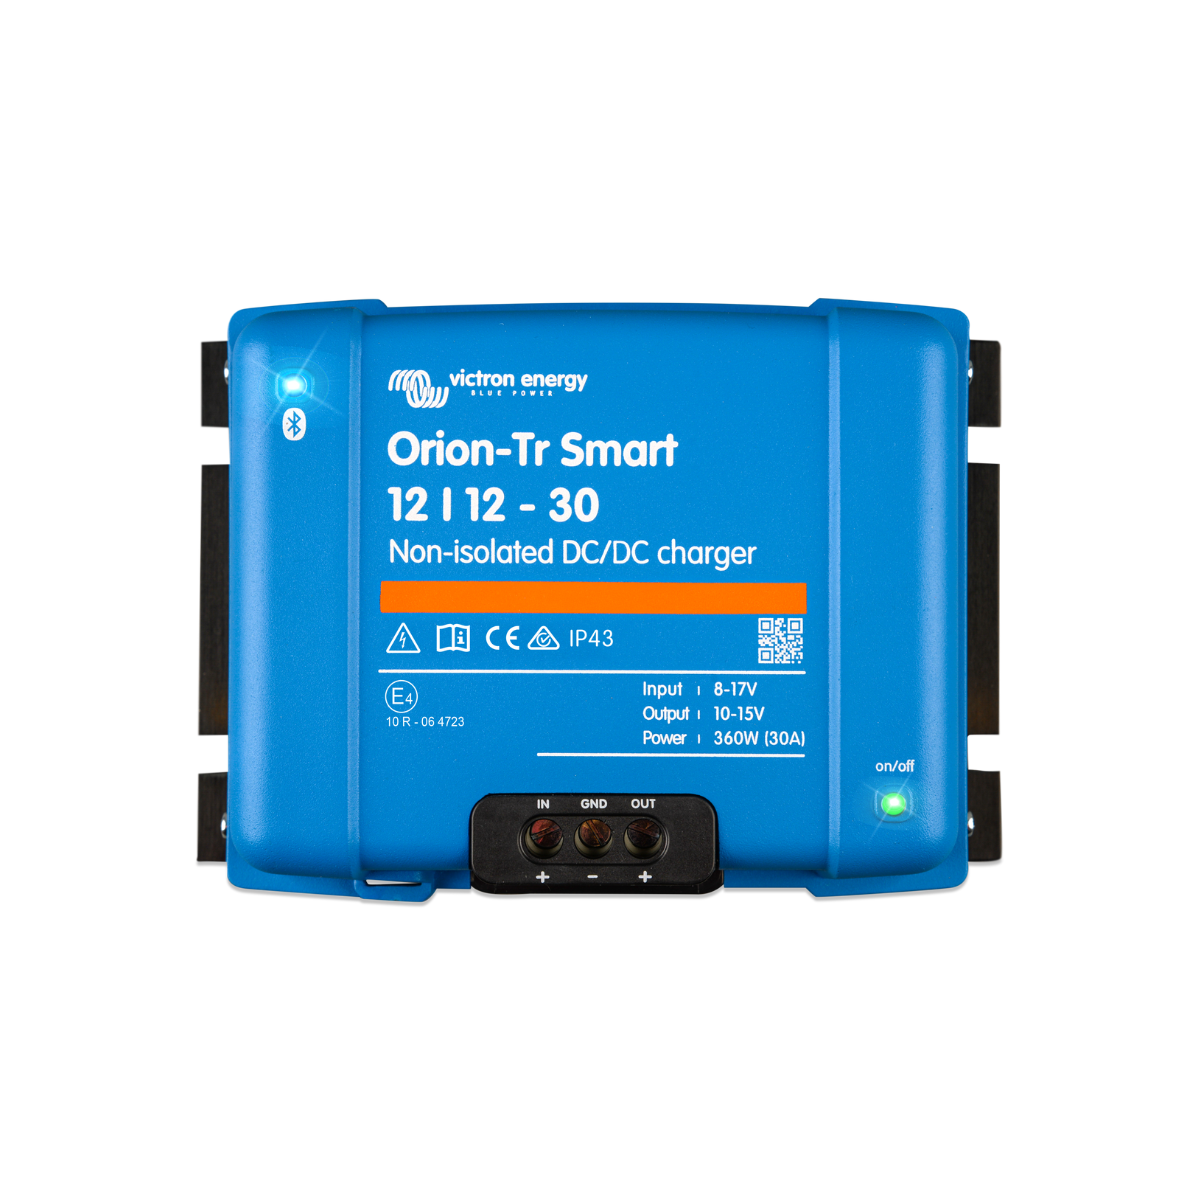 Orion-Tr Smart 12/12-30A - Non Isolated DC-DC Charger